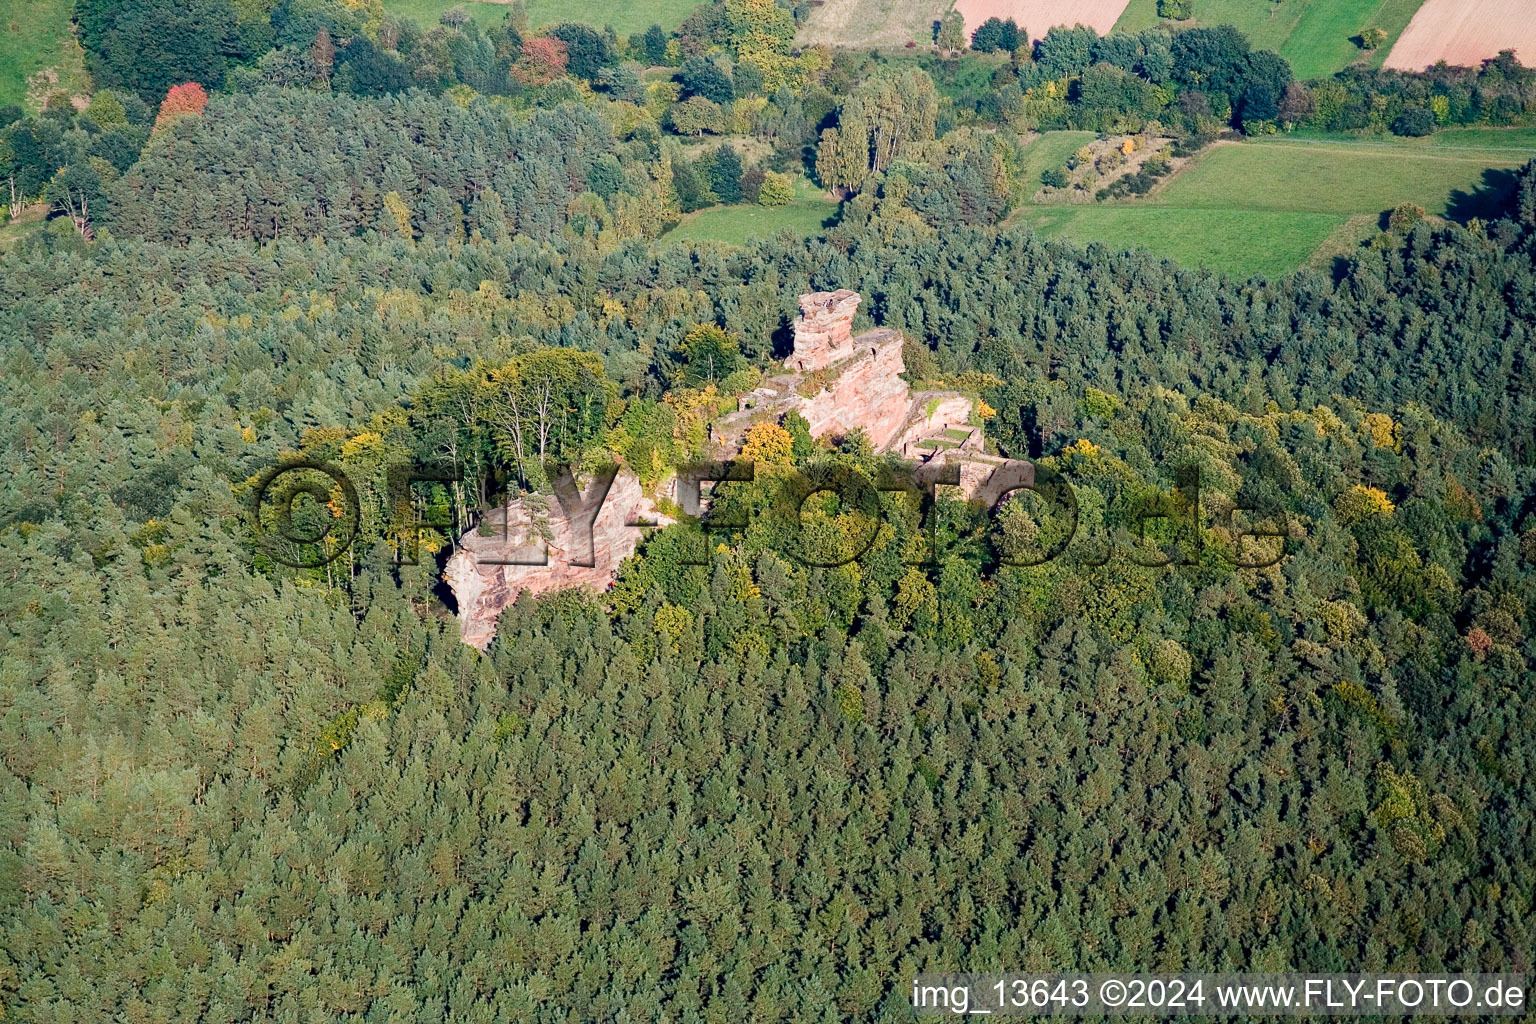 Ruins and vestiges of the former castle and fortress Burg Drachenfels in Busenberg in the state Rhineland-Palatinate